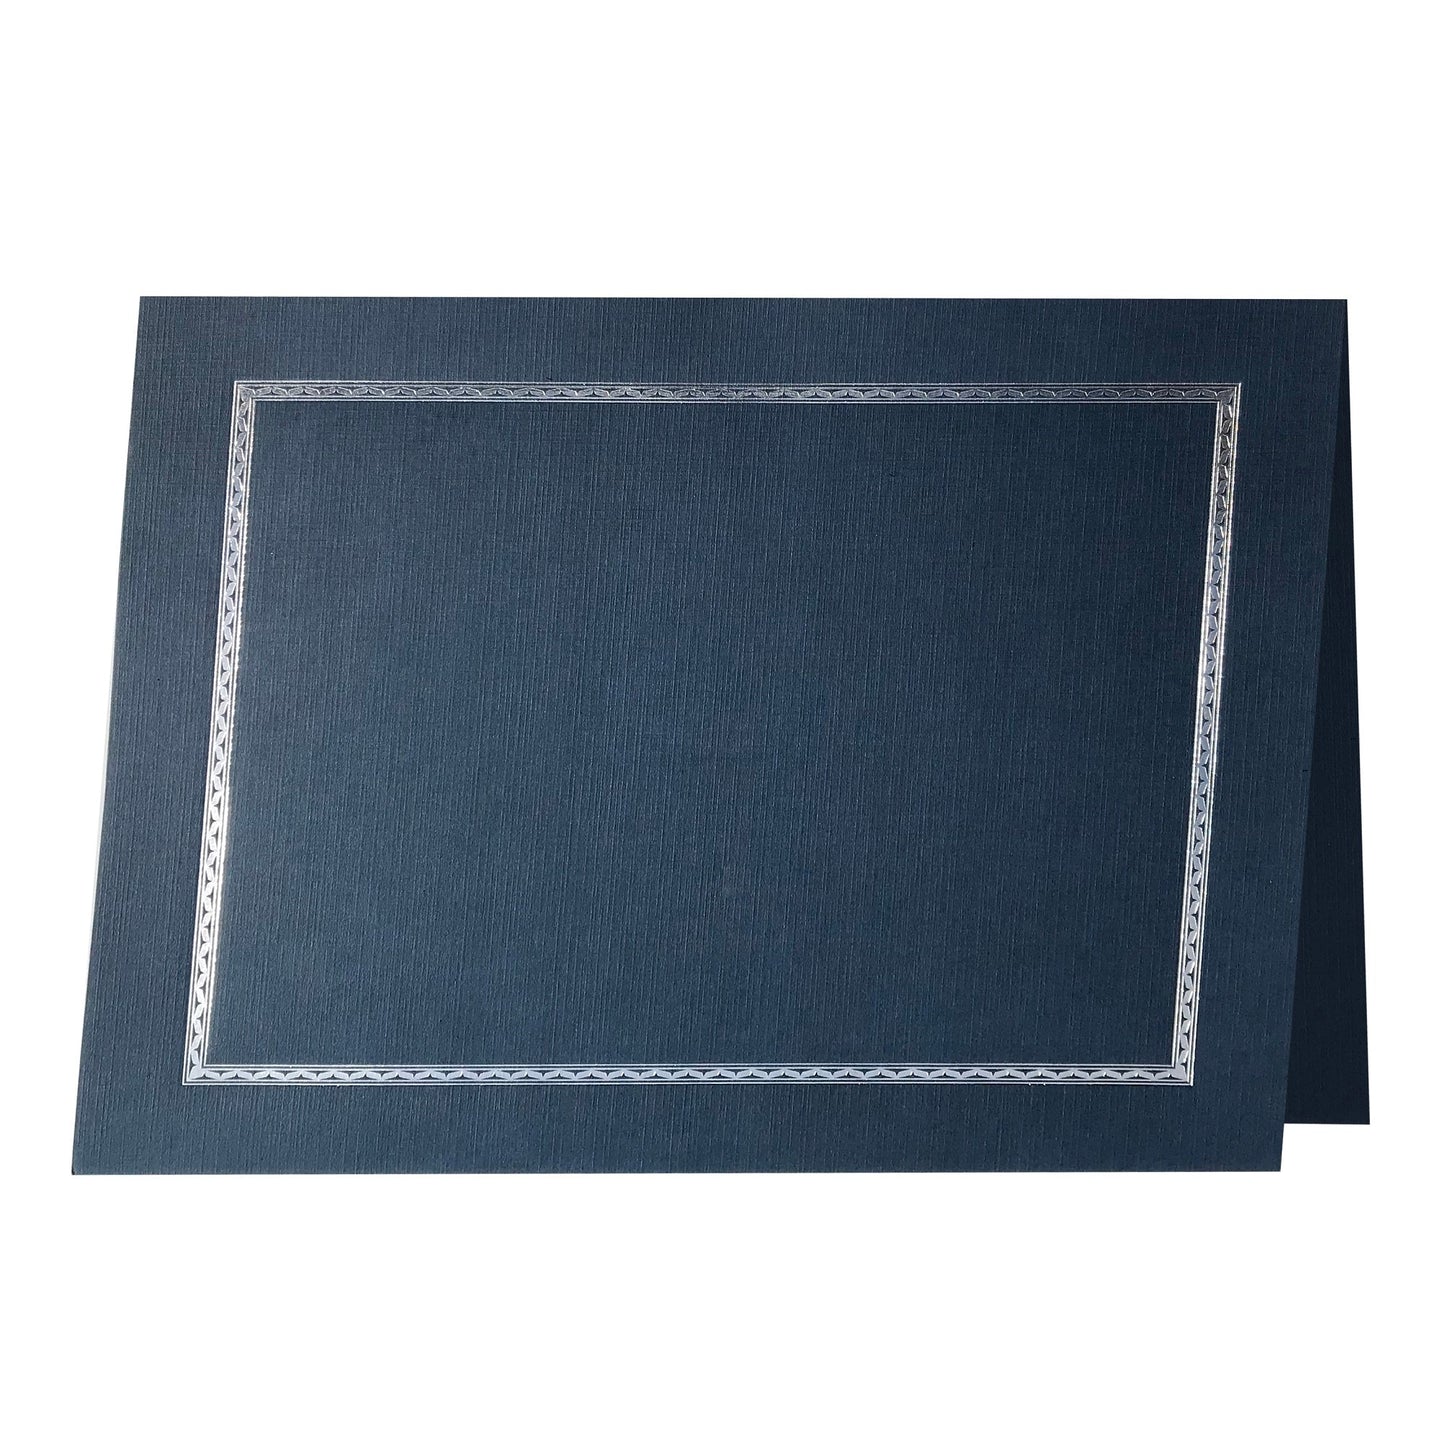 St. James® Elite™ Aztec Certificate Holders, Navy Linen with Silver Foil, Pack of 25